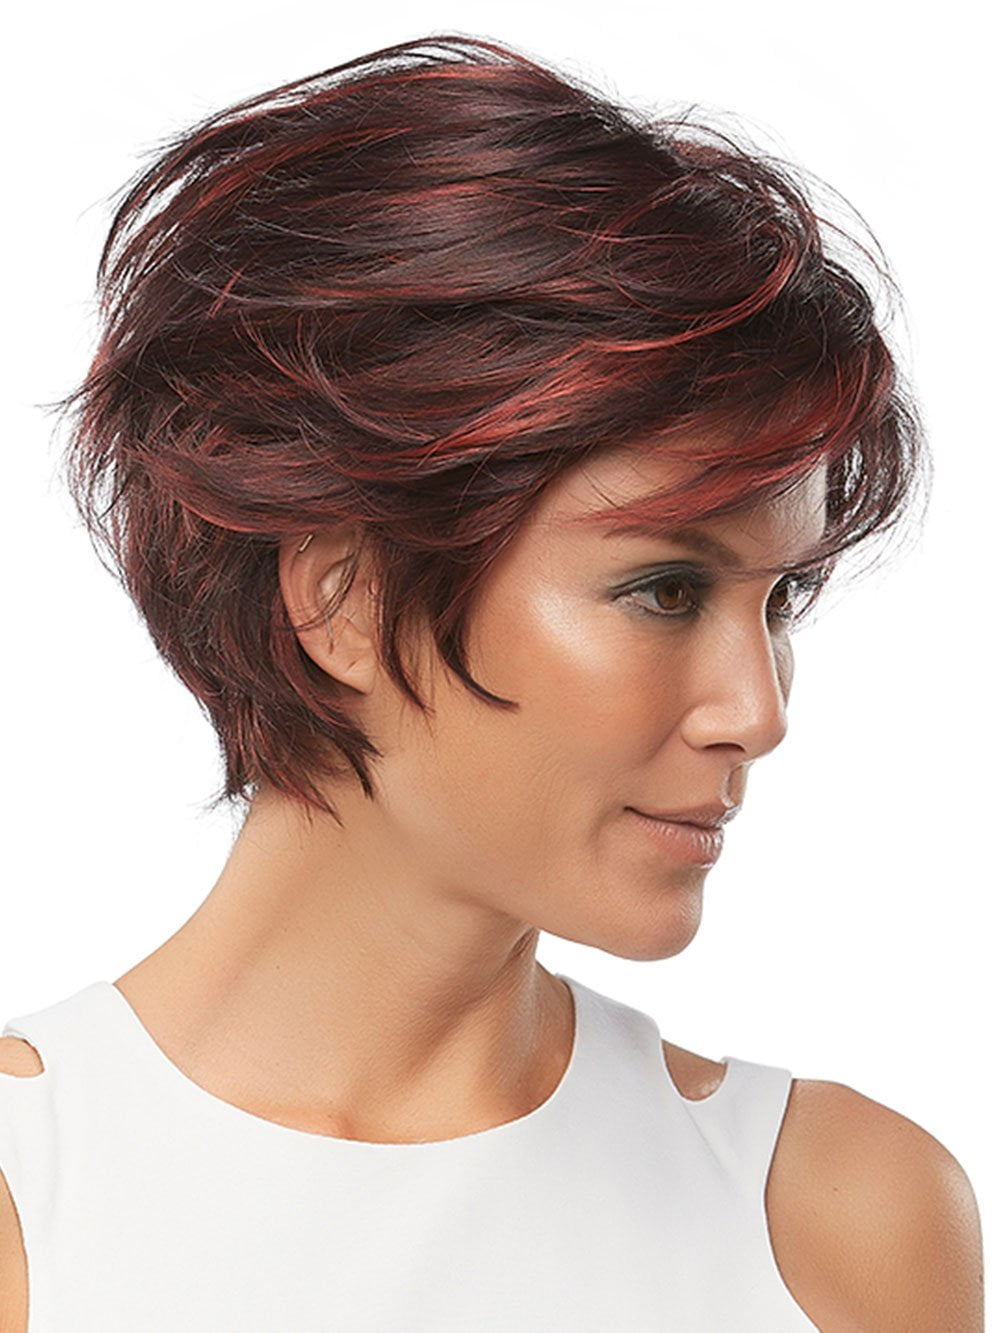 Short, layered, and voluminous synthetic wig with rounded layers